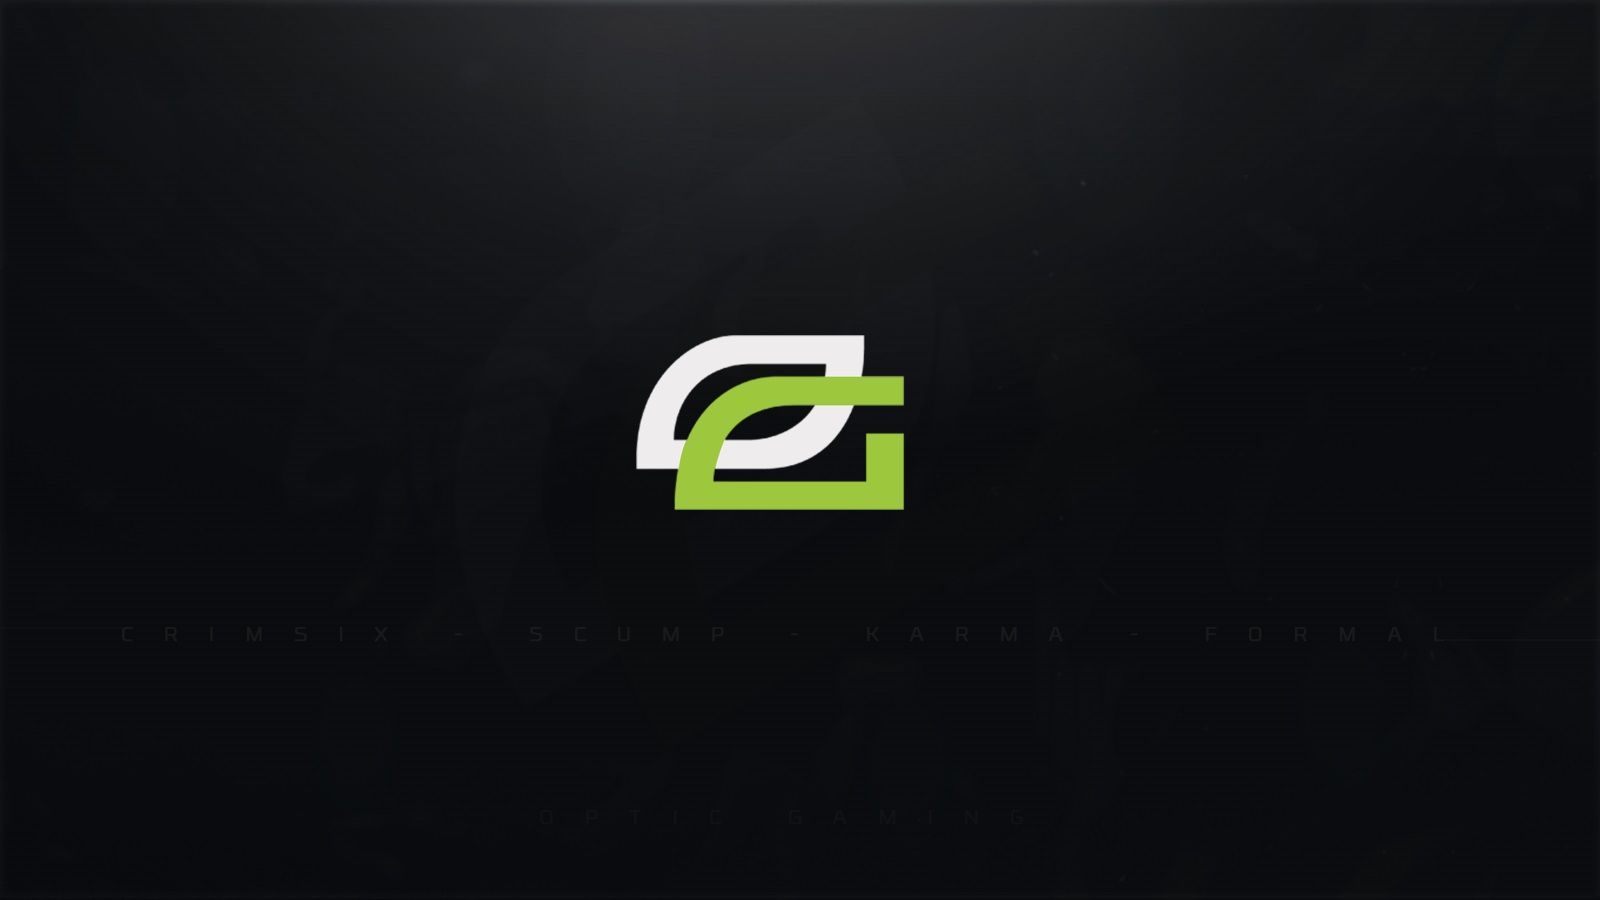 Free download Optic Gaming Wallpaper HD for 1600x900